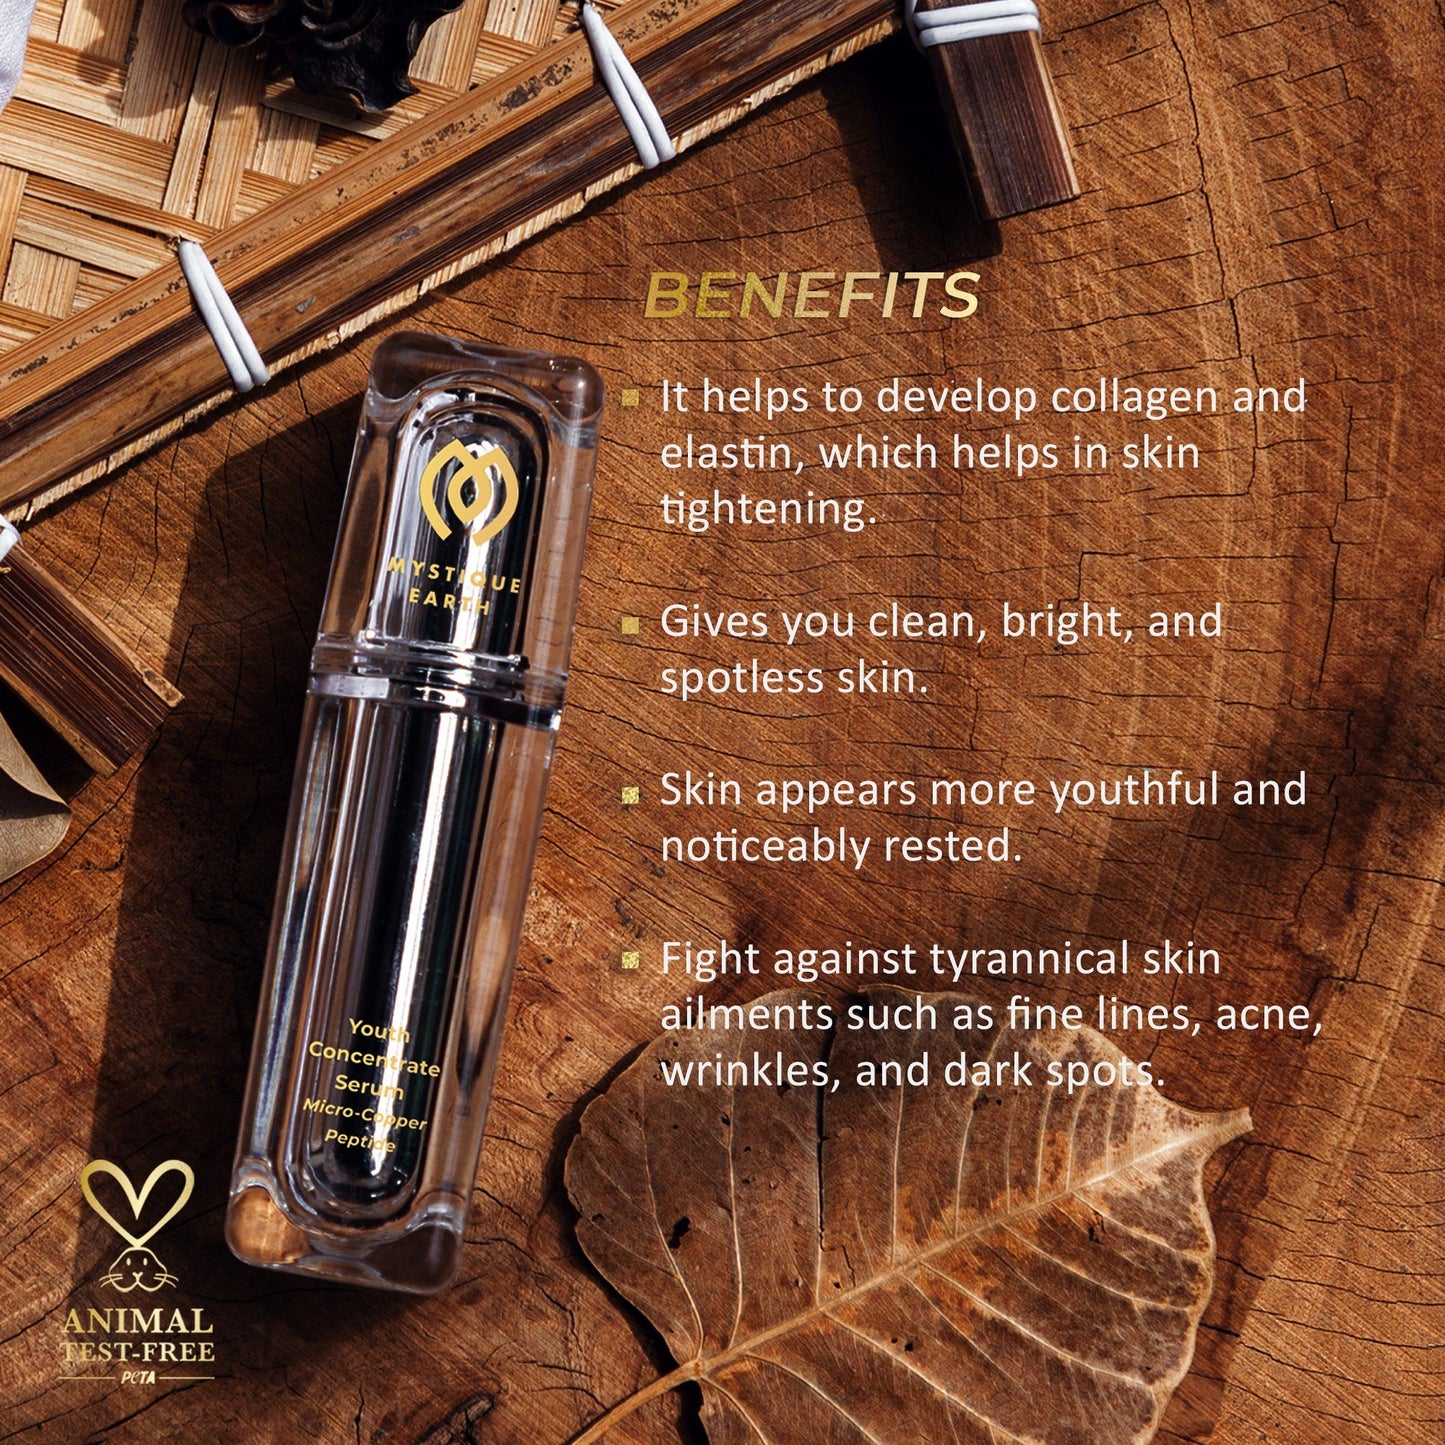 YOUTH CONCENTRATE SERUM